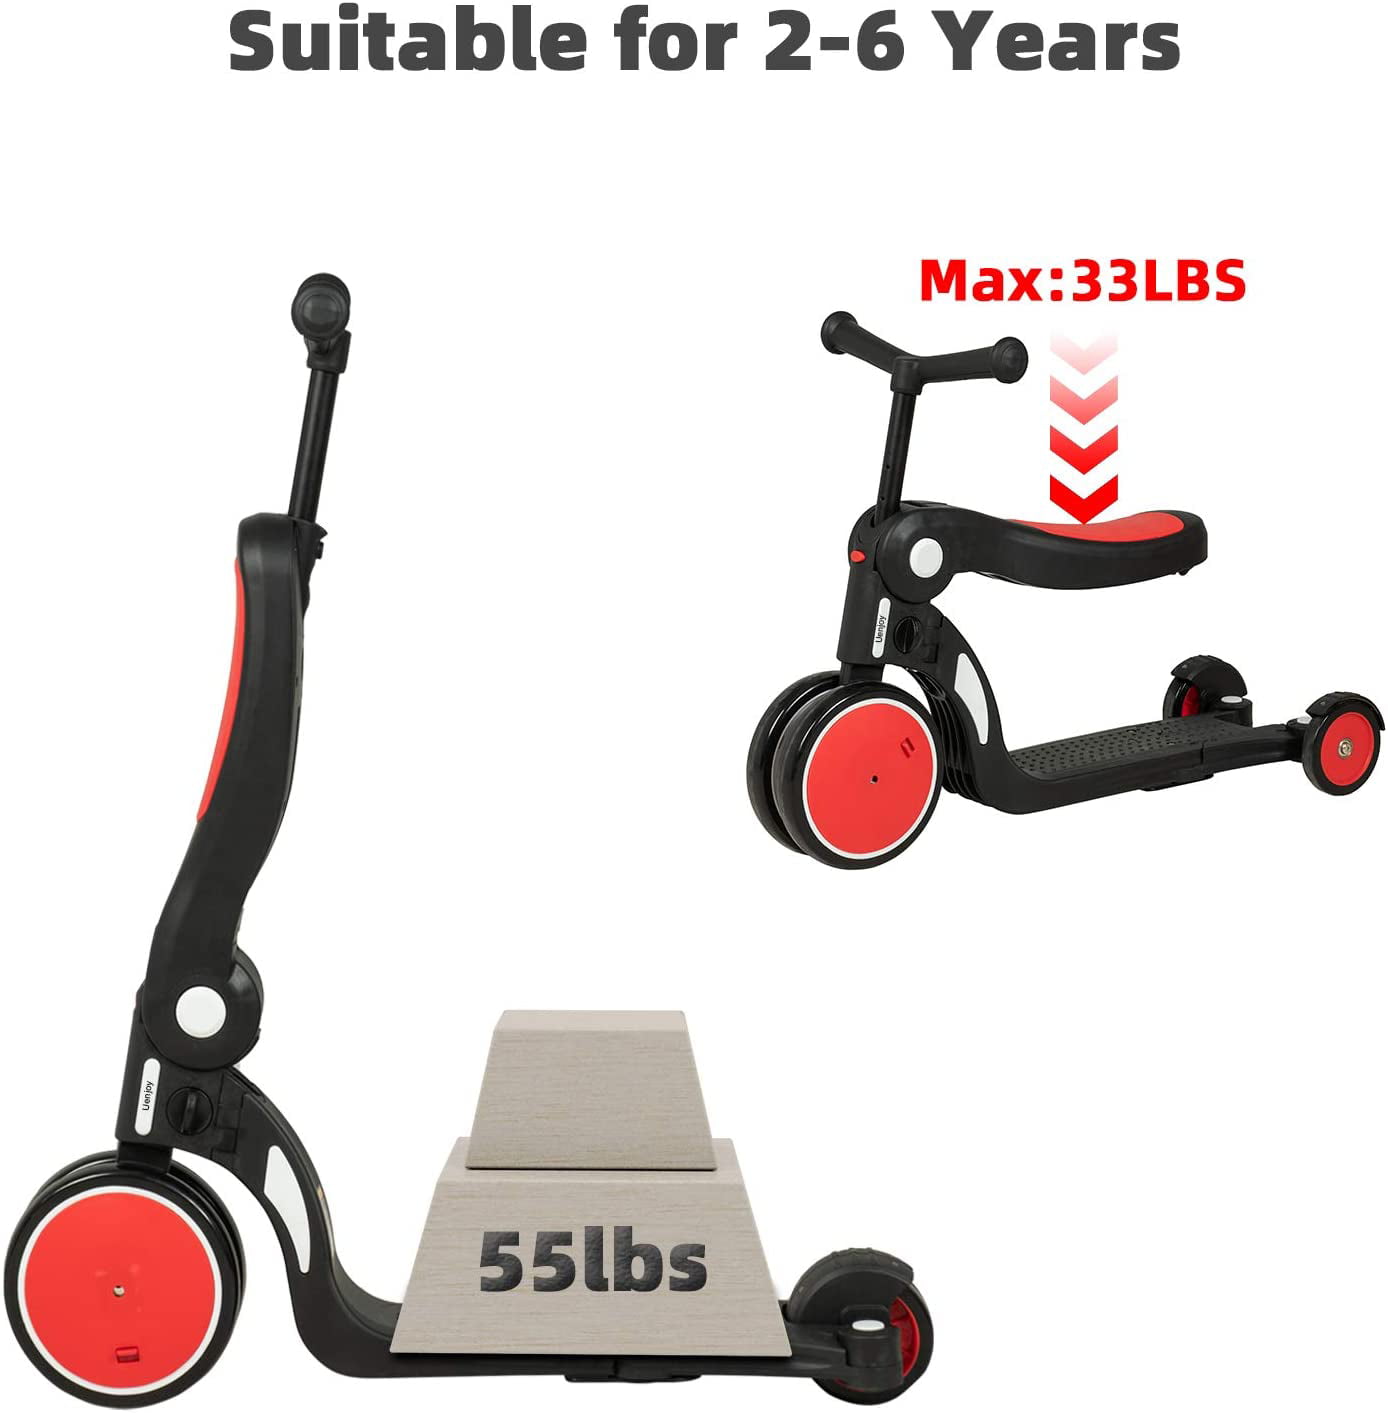 HUIGE Foldable Duty Tri Scooter with adjustable handle bars suitable 2-6 years old baby multifunctional tricycle,Blue 